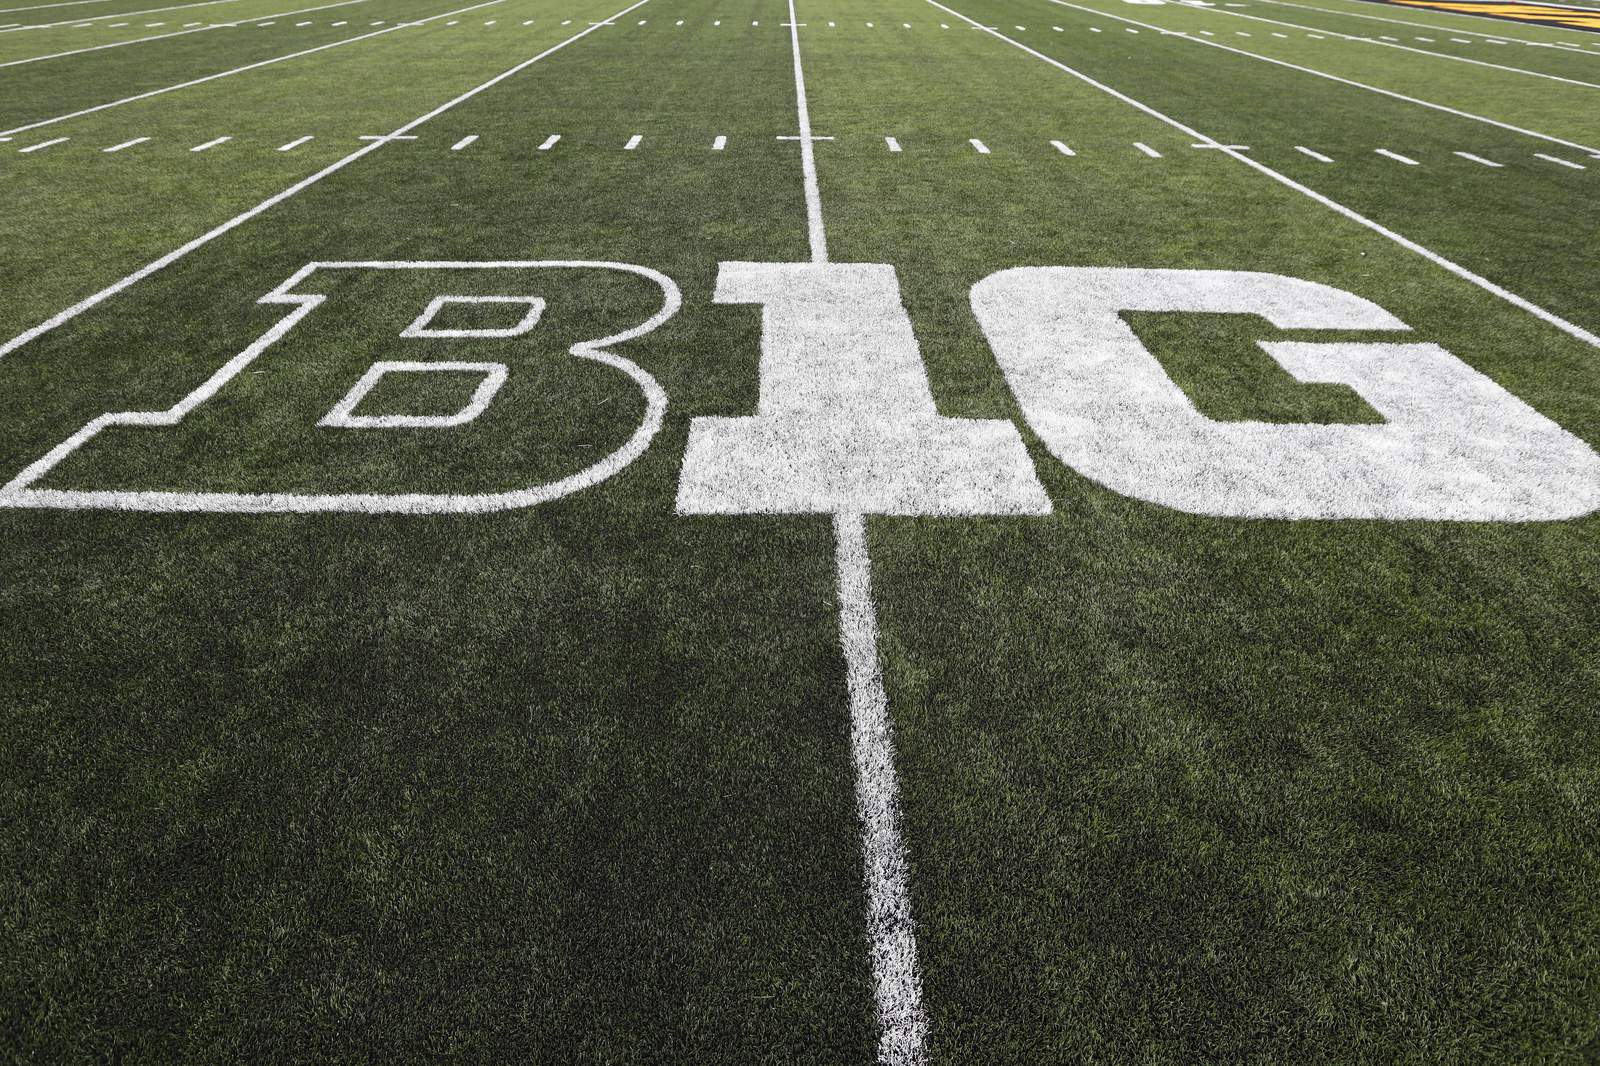 School leader: B1G football on hold until questions answered